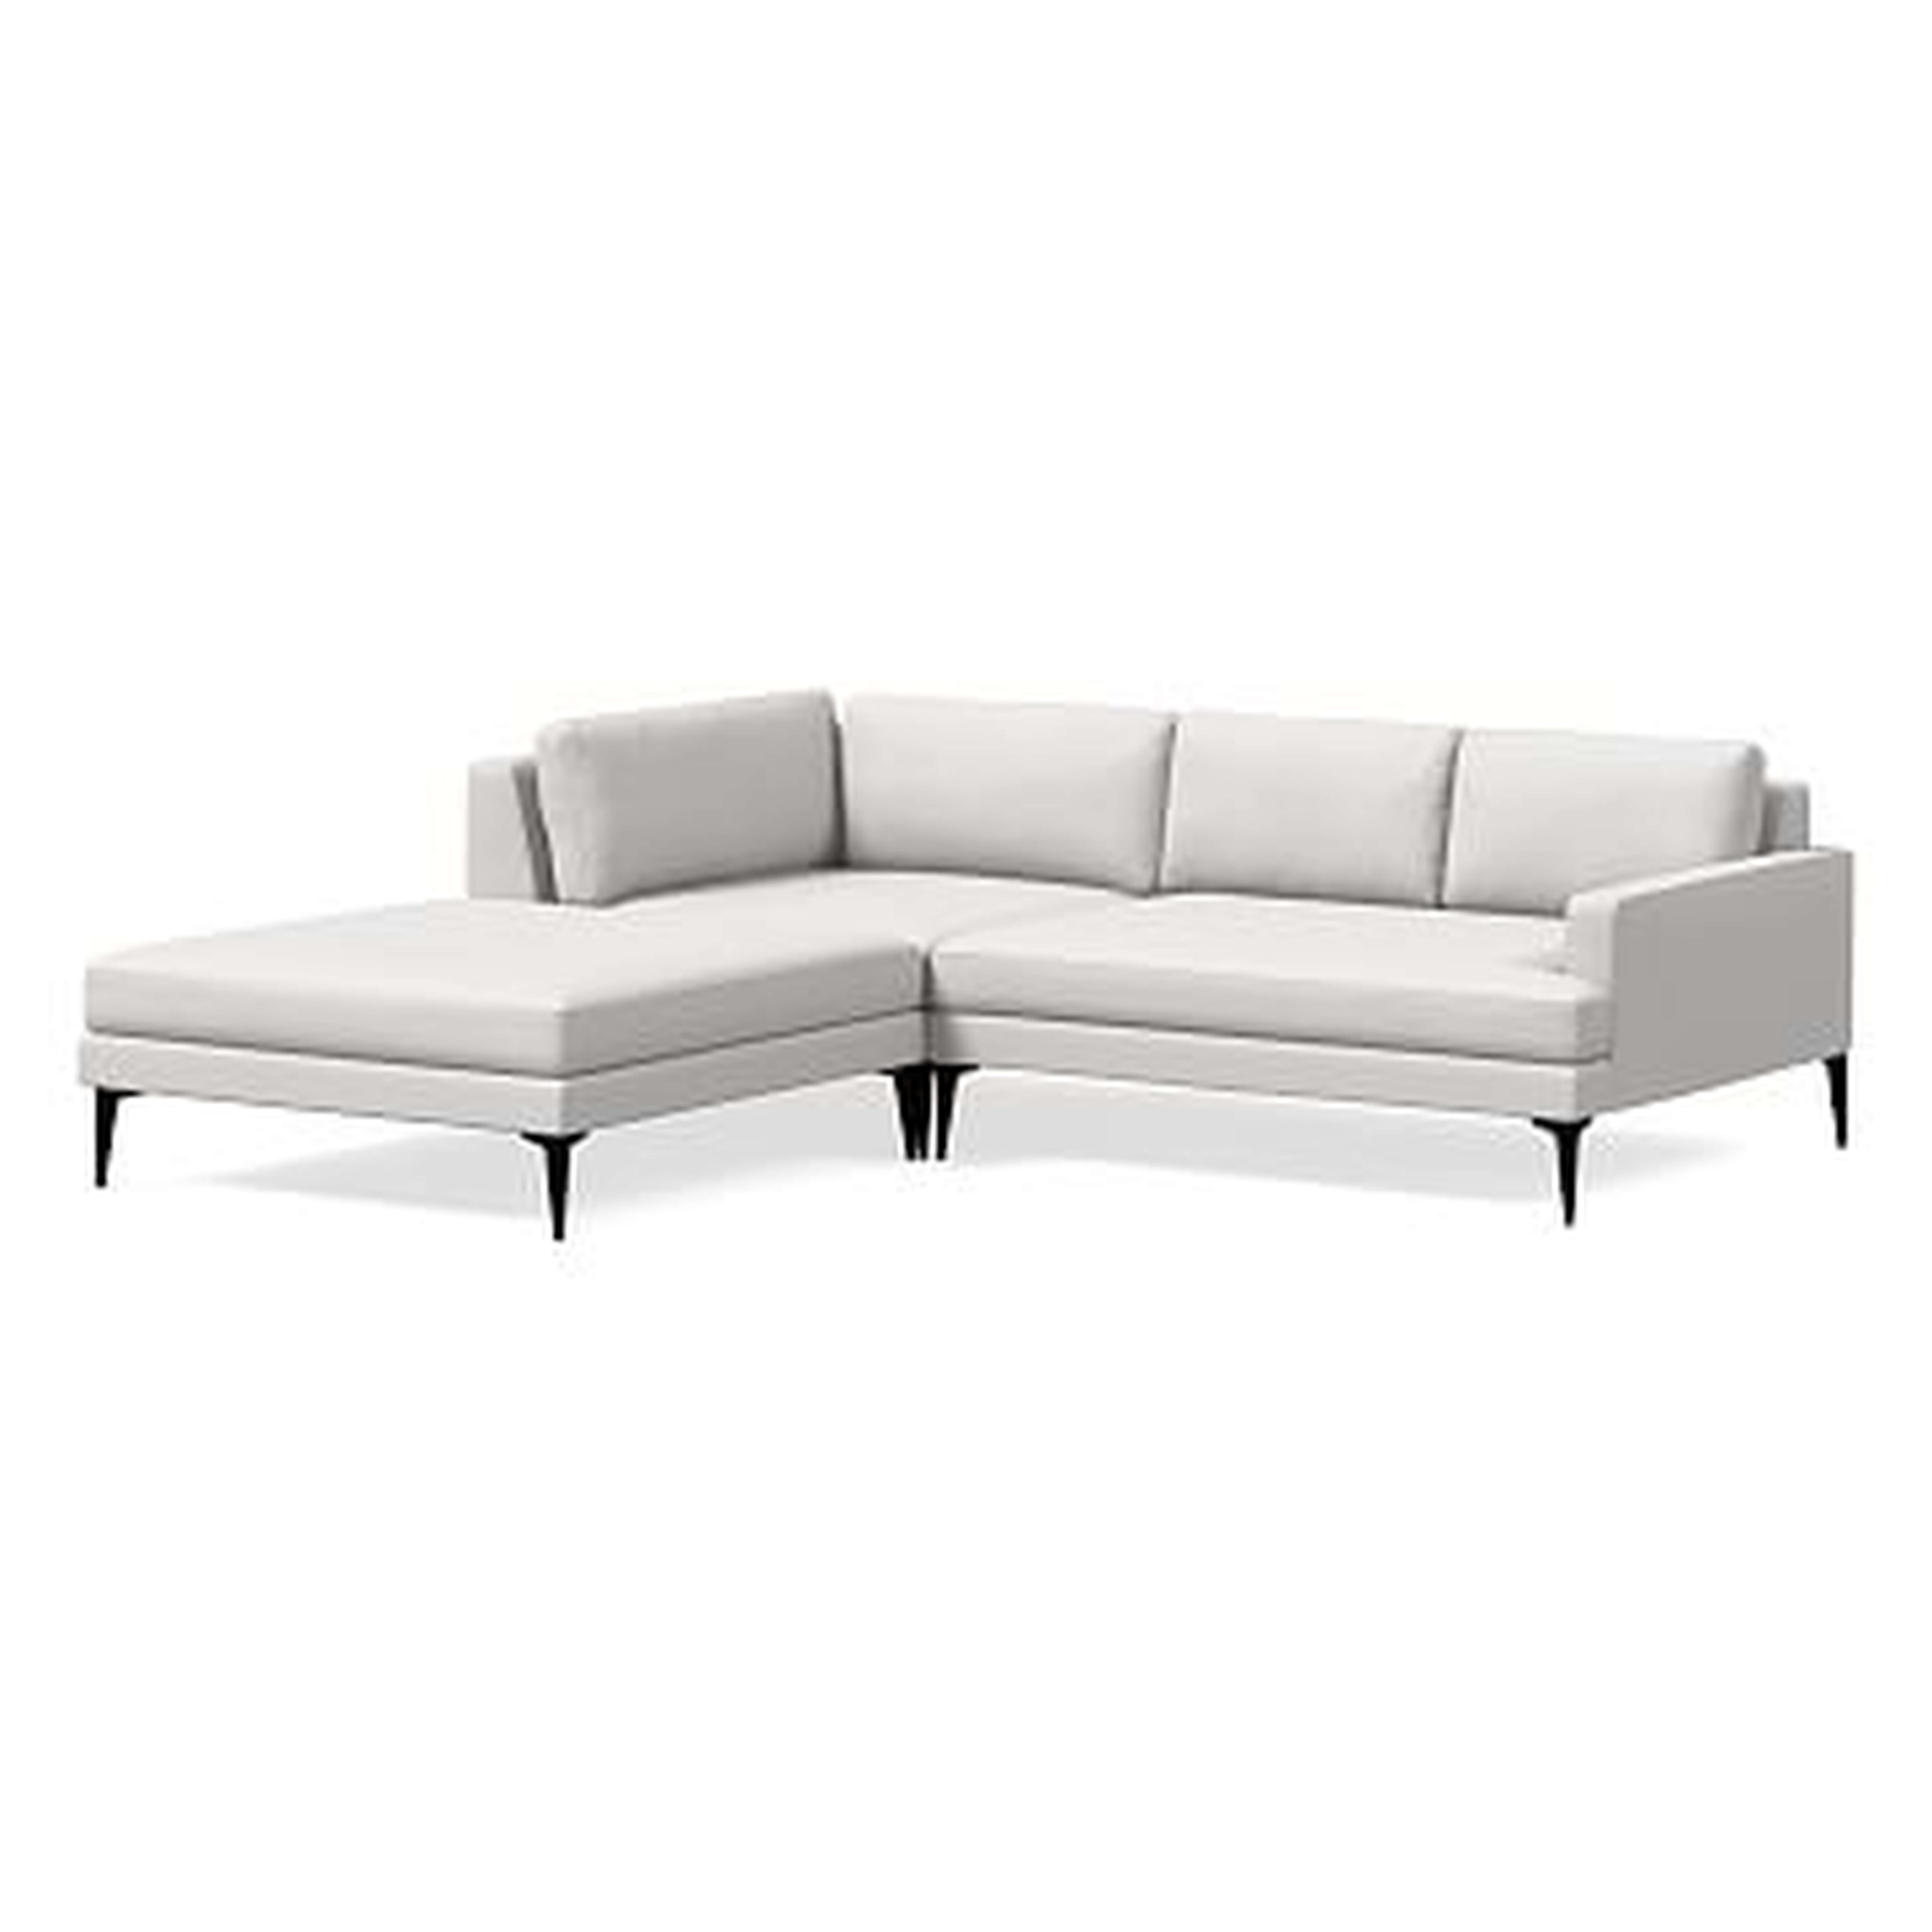 Andes Sectional Set 25: XL Right Arm 2 Seater Sofa, XL Corner, XL Ottoman, Poly, Performance Washed Canvas, White, Dark Pewter - West Elm